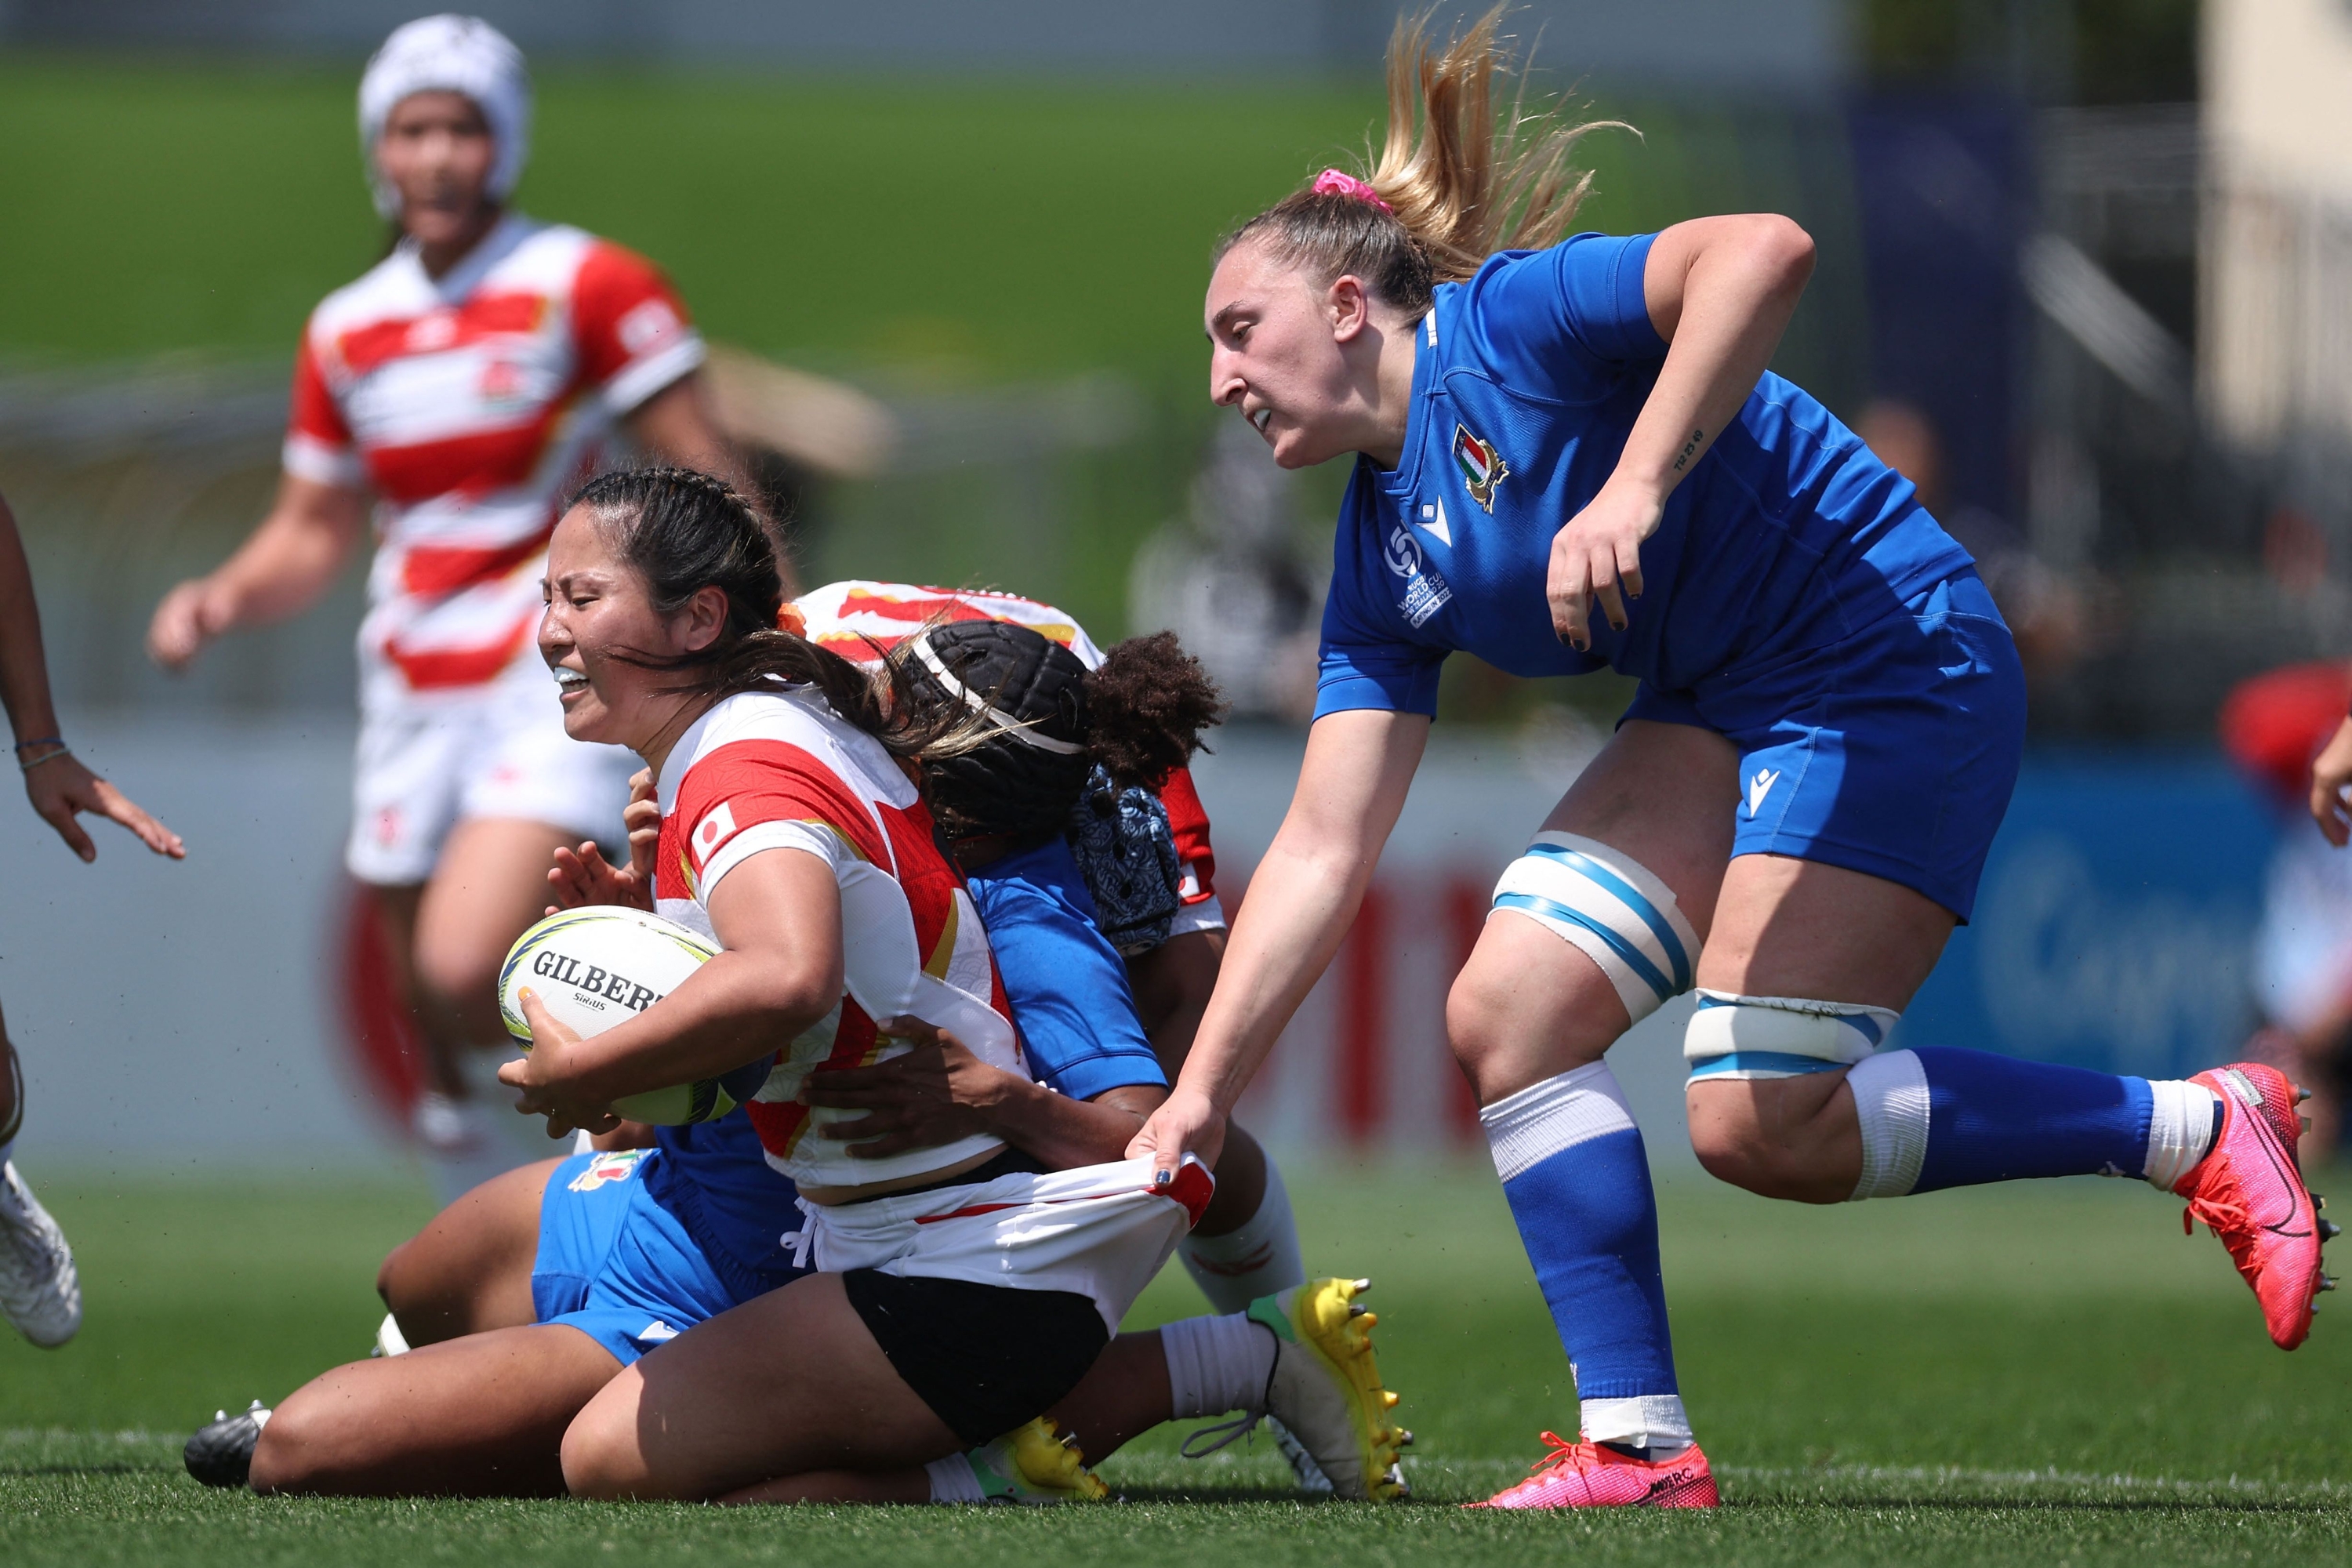 Japan's Seina Saito (L) is tackled by Italy's Francesca Sgorbini (R )during the New Zealand 2021 Womens Rugby World Cup Pool B match between Italy and Japan at the Waitakere Stadium in Auckland on October 23, 2022. (Photo by Marty MELVILLE / AFP)